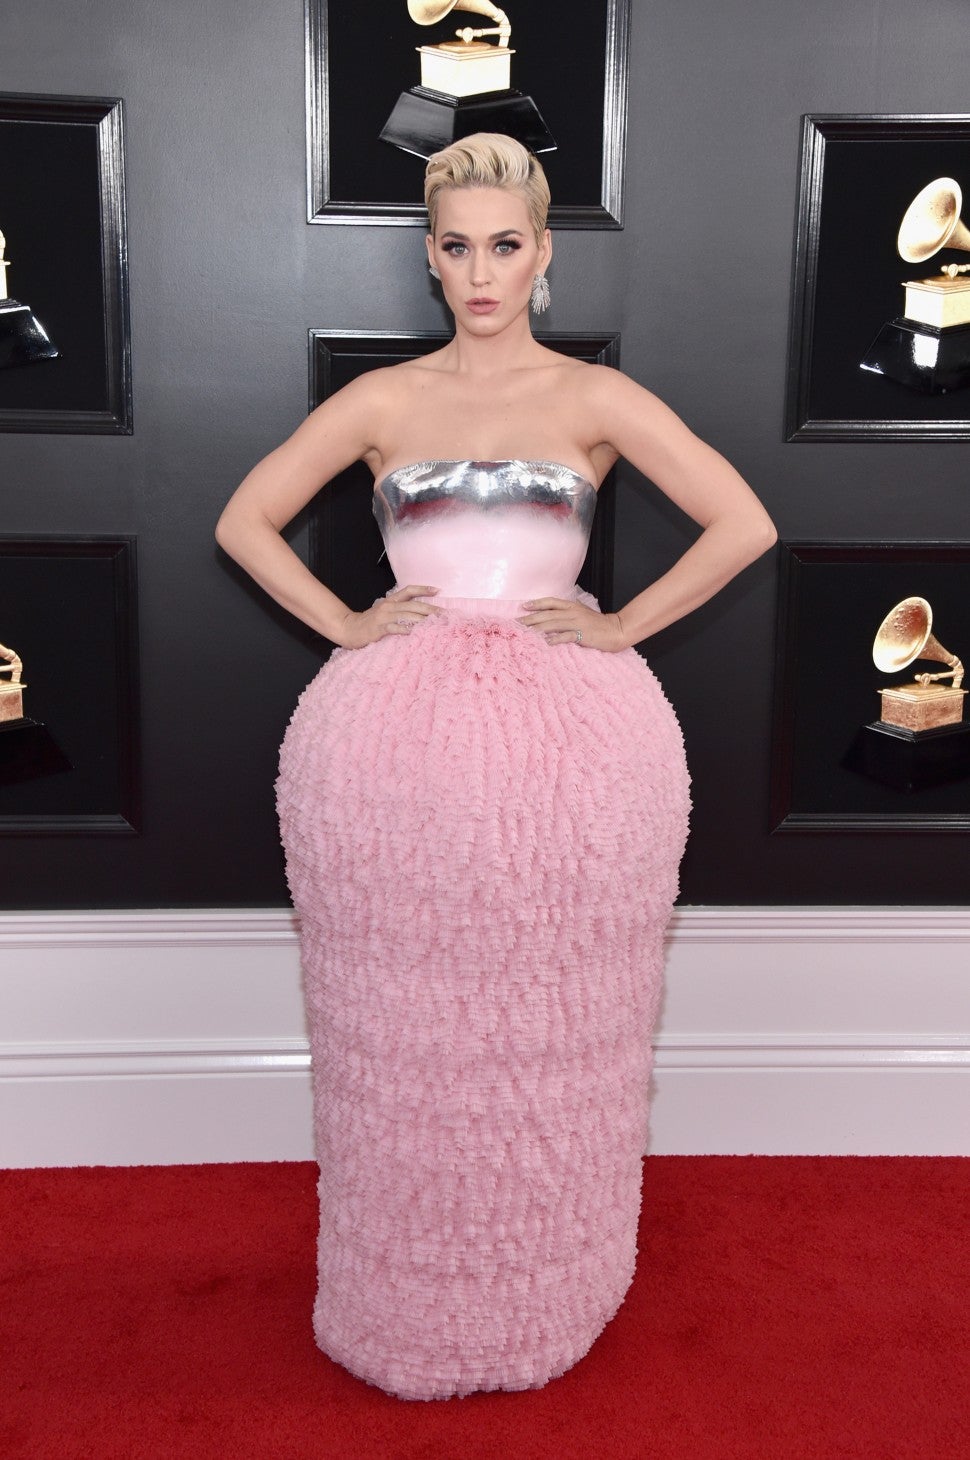 Katy Perry at Grammys 